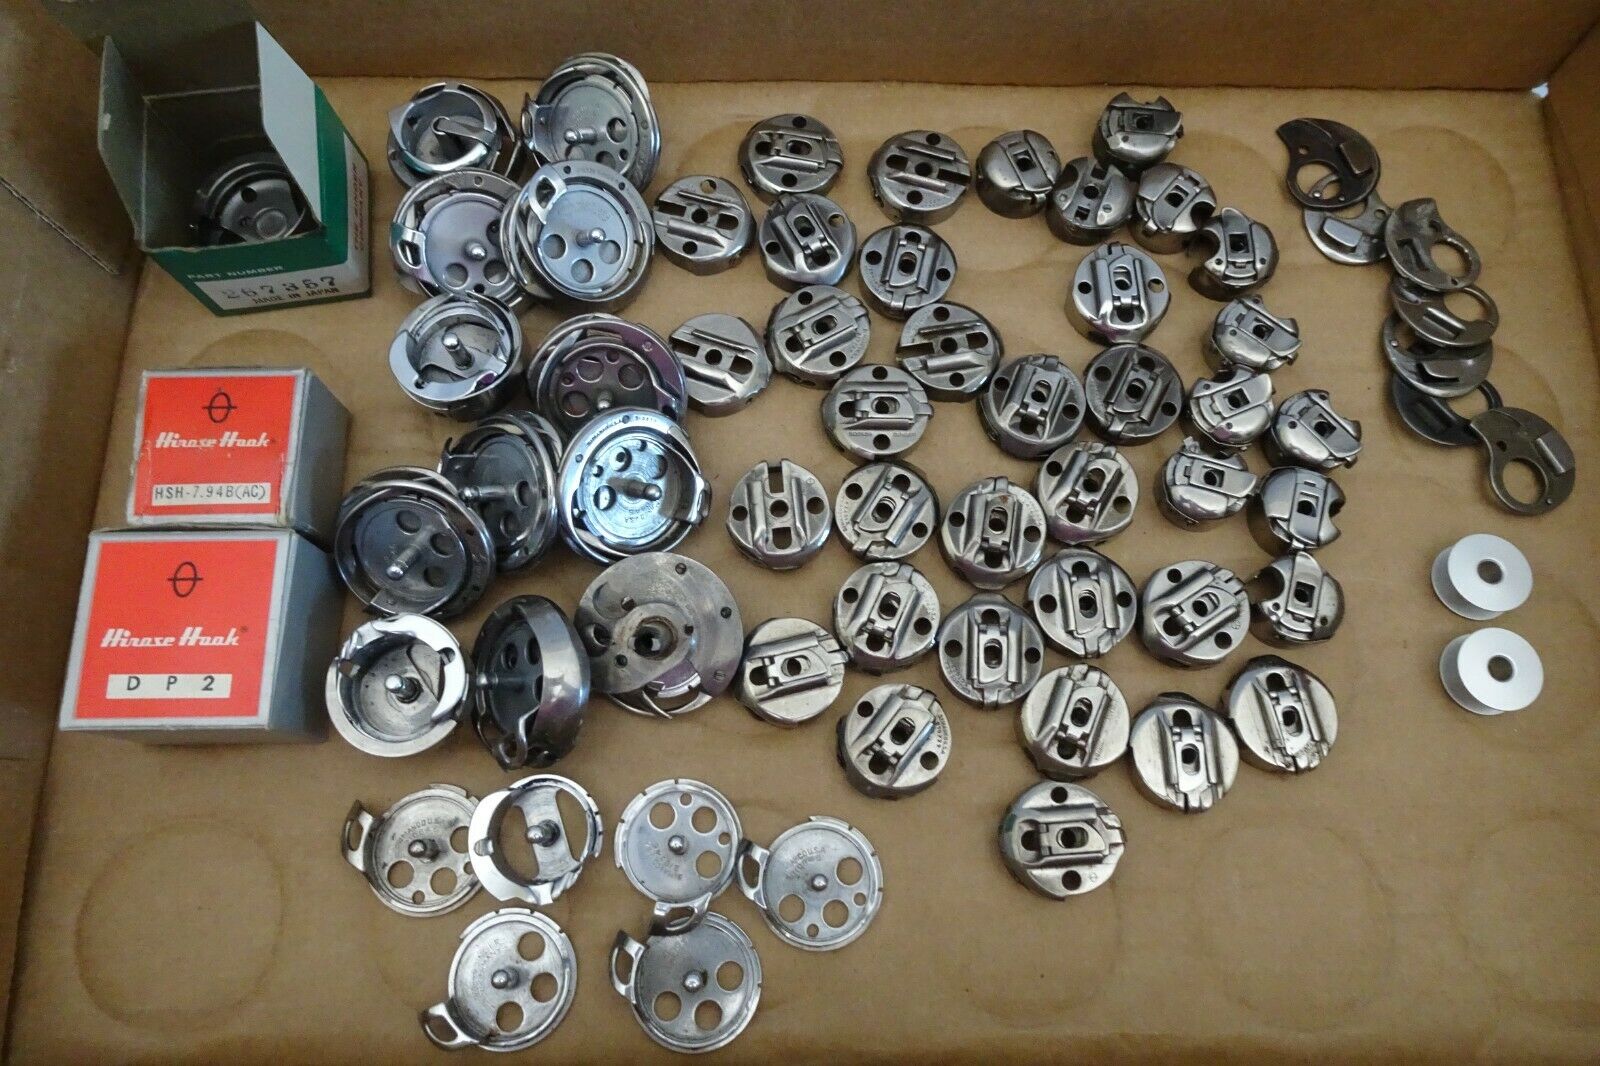 67pc Old Used Vintage Industrial Sewing Machines Lot Bobbin Case Parts Singer +